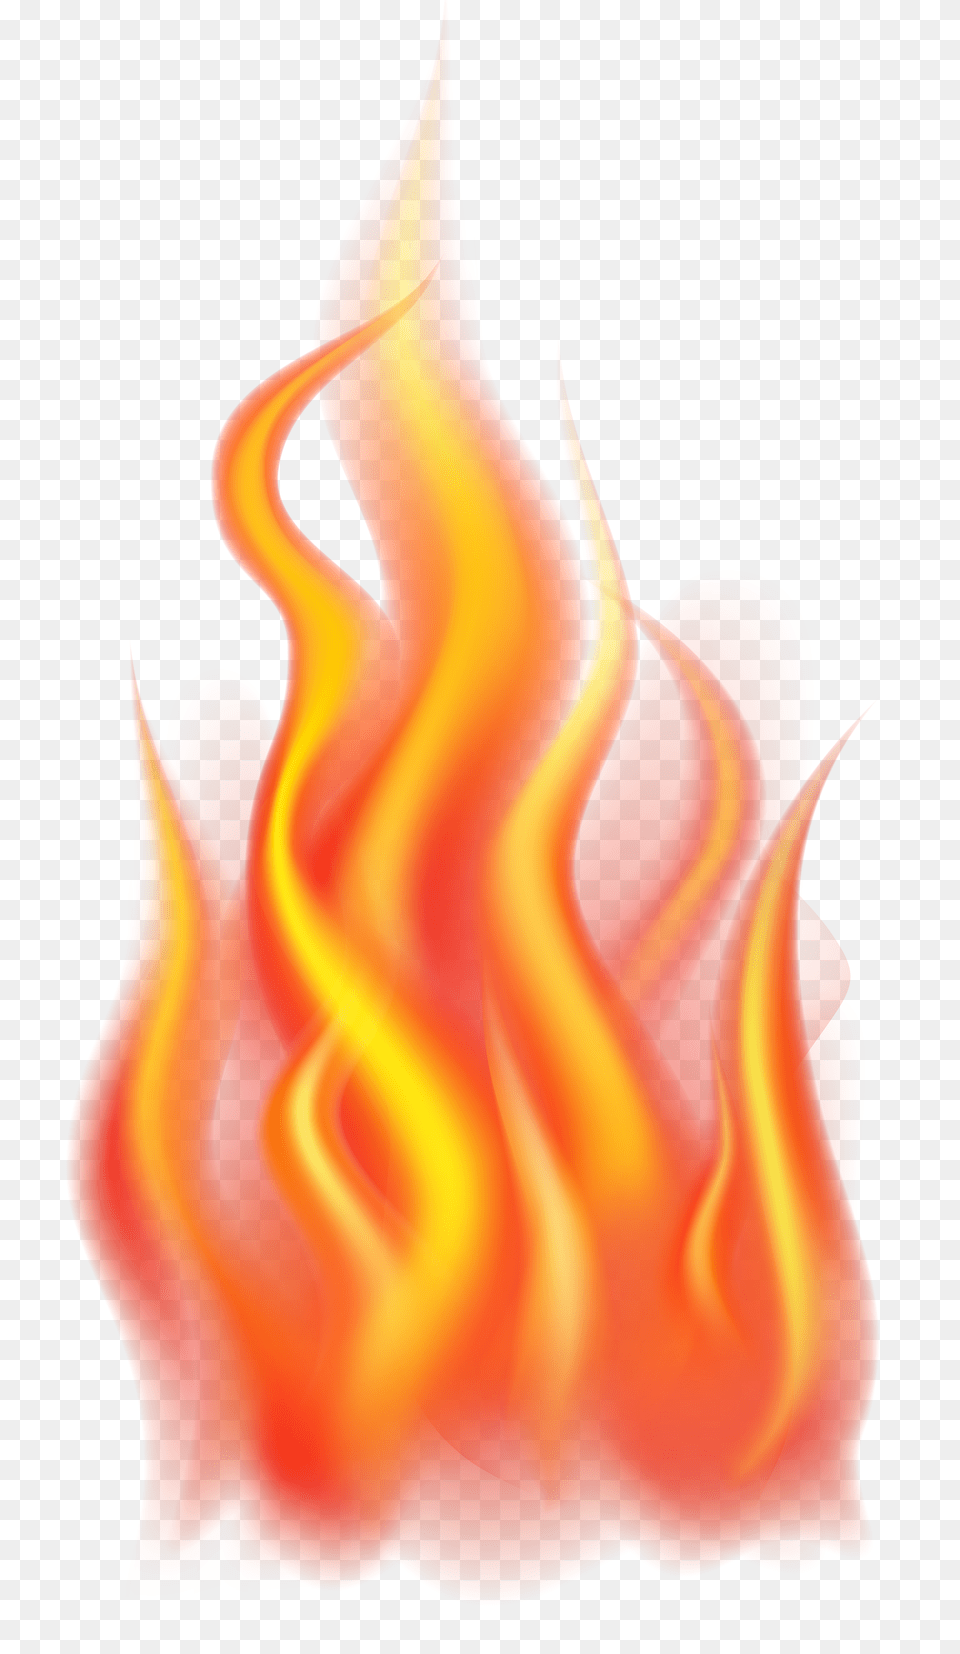 Fire Clipart Download Clip Pictures Of Flames Png Image